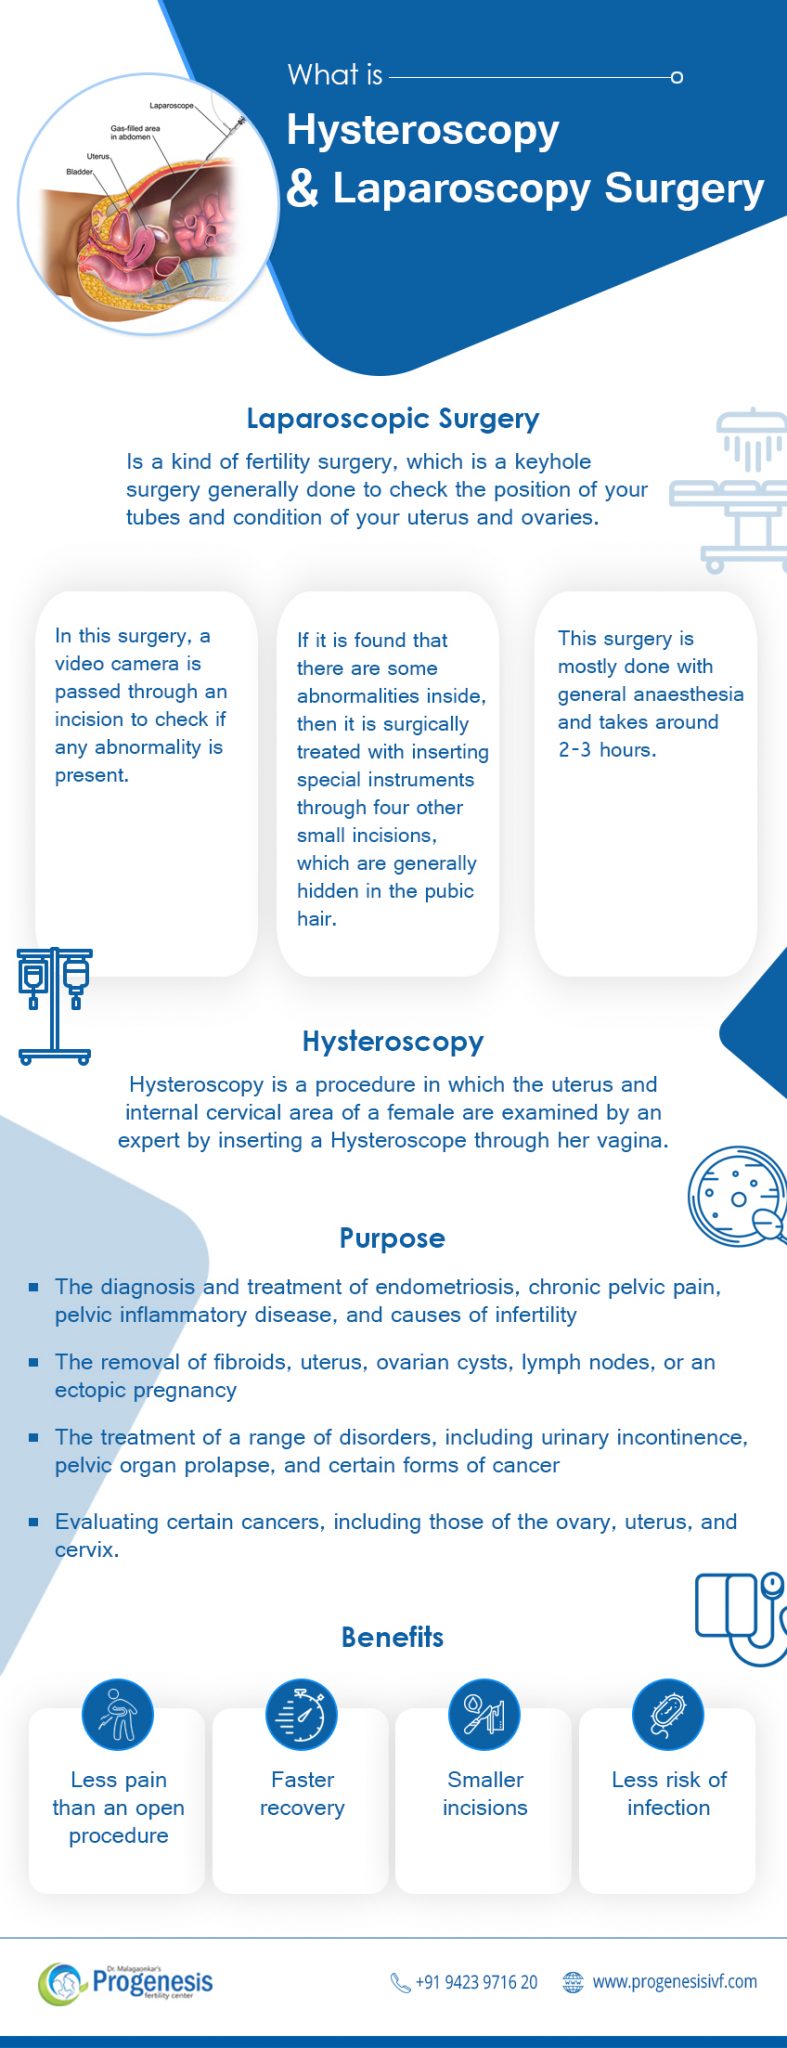 What is Hysteroscopy and Laparoscopy Surgery